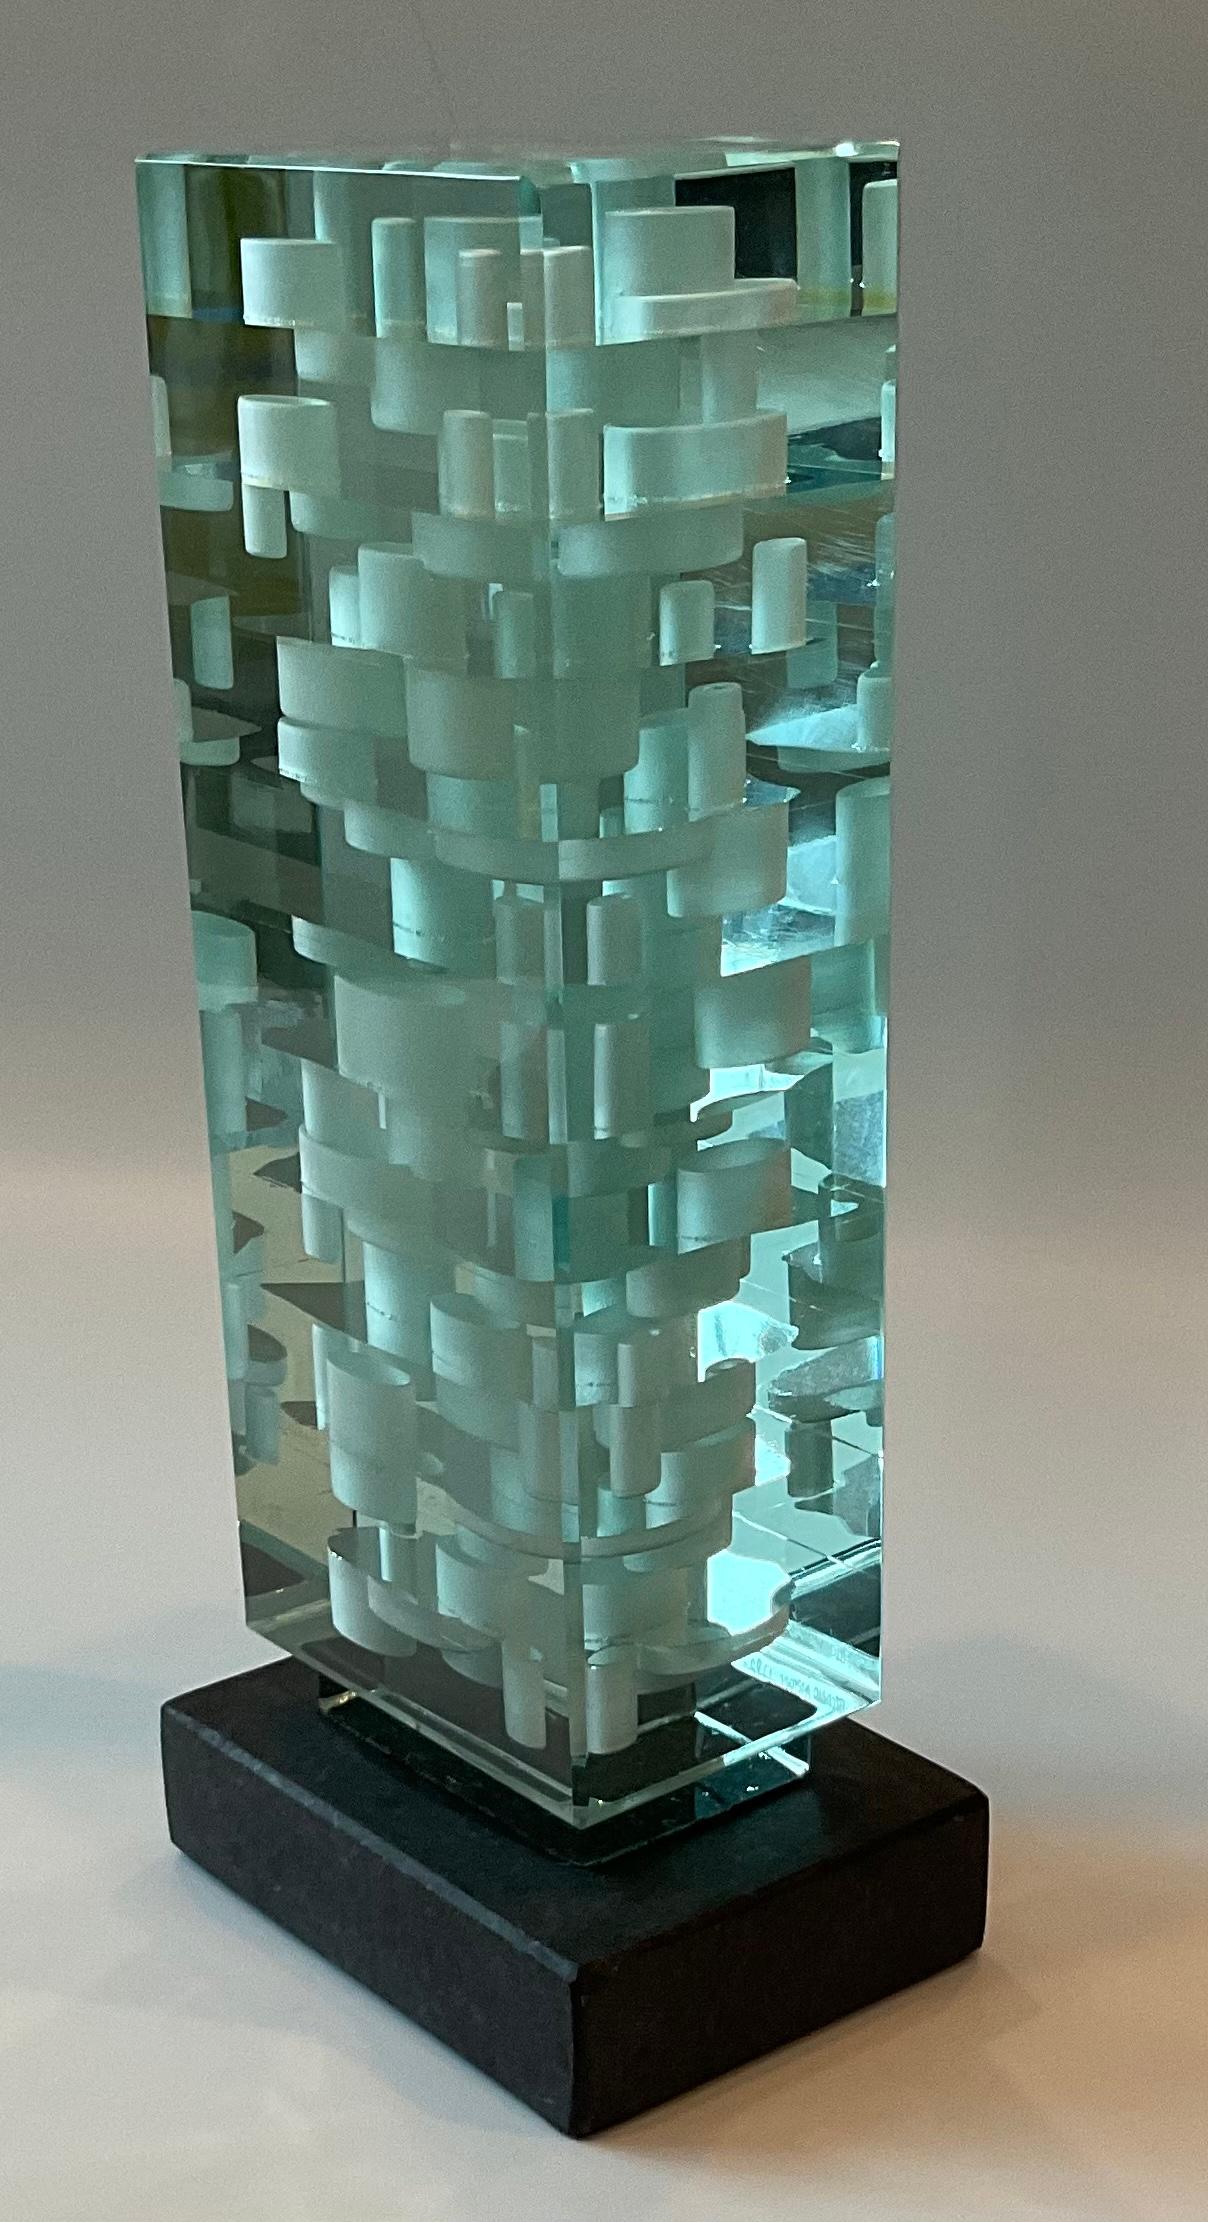 Mid-Century Modern Geometric Abstract Murano Glass Sculpture by Gino Vistosi, 1985 For Sale